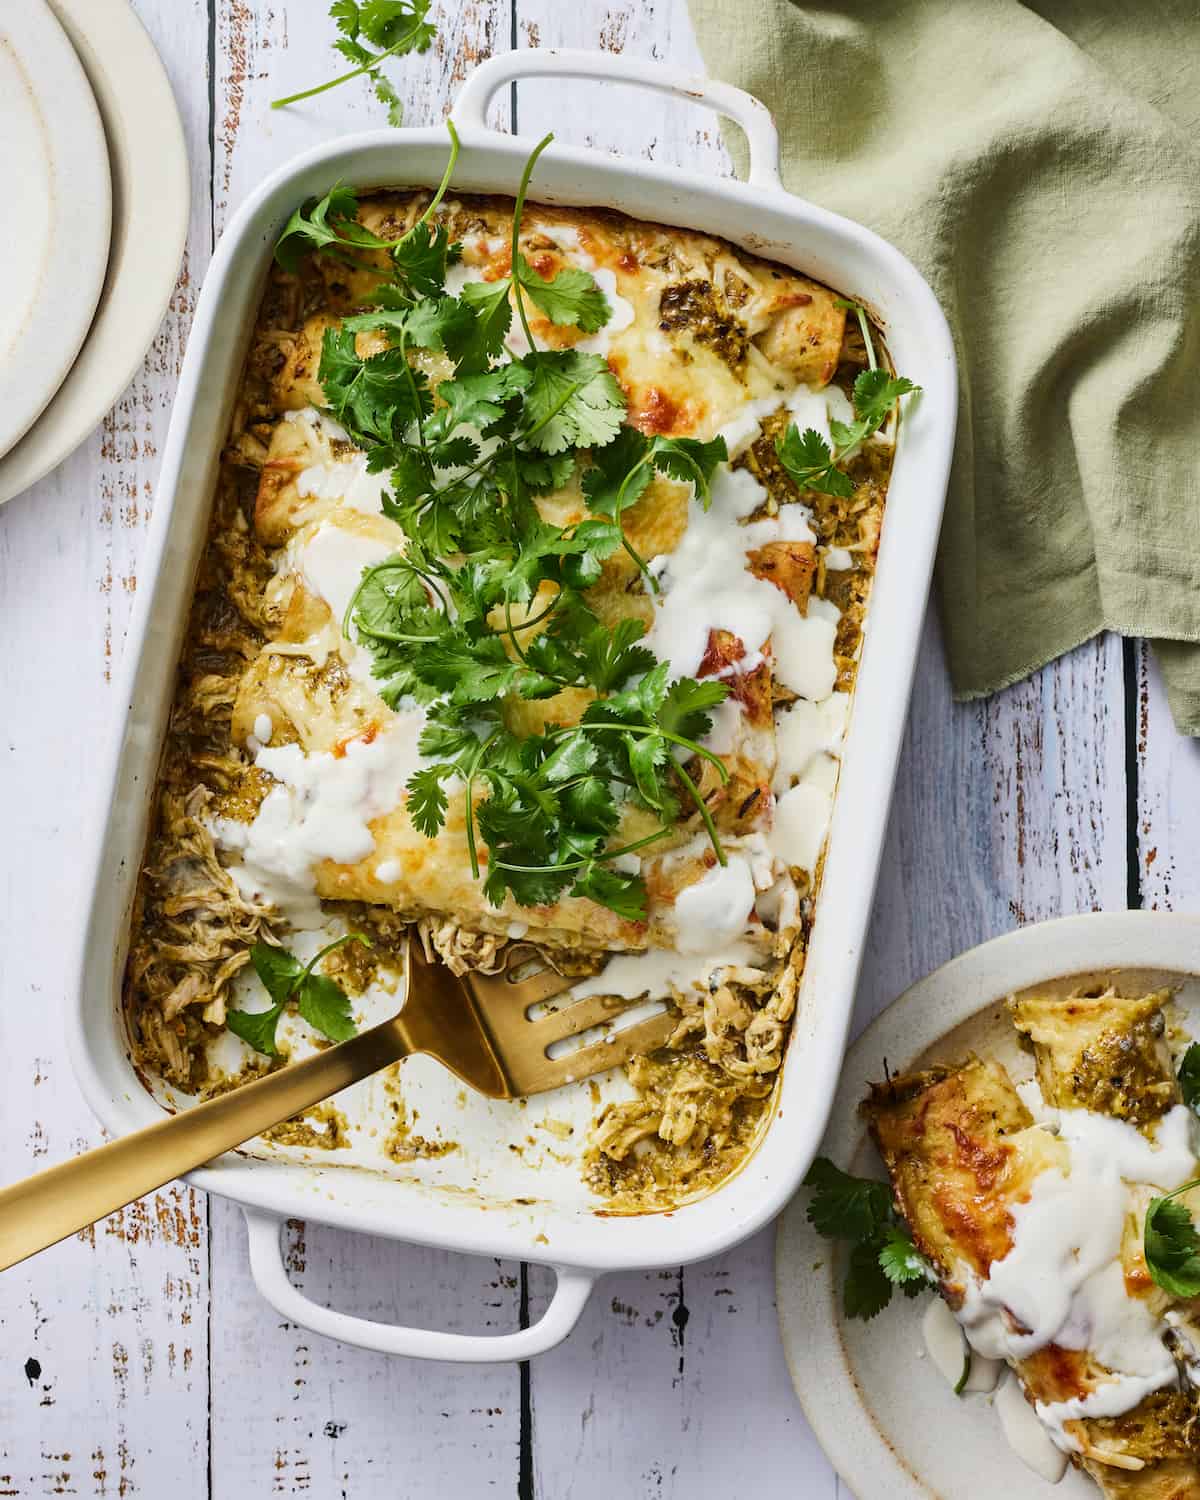 Green Chicken Enchiladas in a casserole dish with cilantro leaves spread across the top of the dish.  